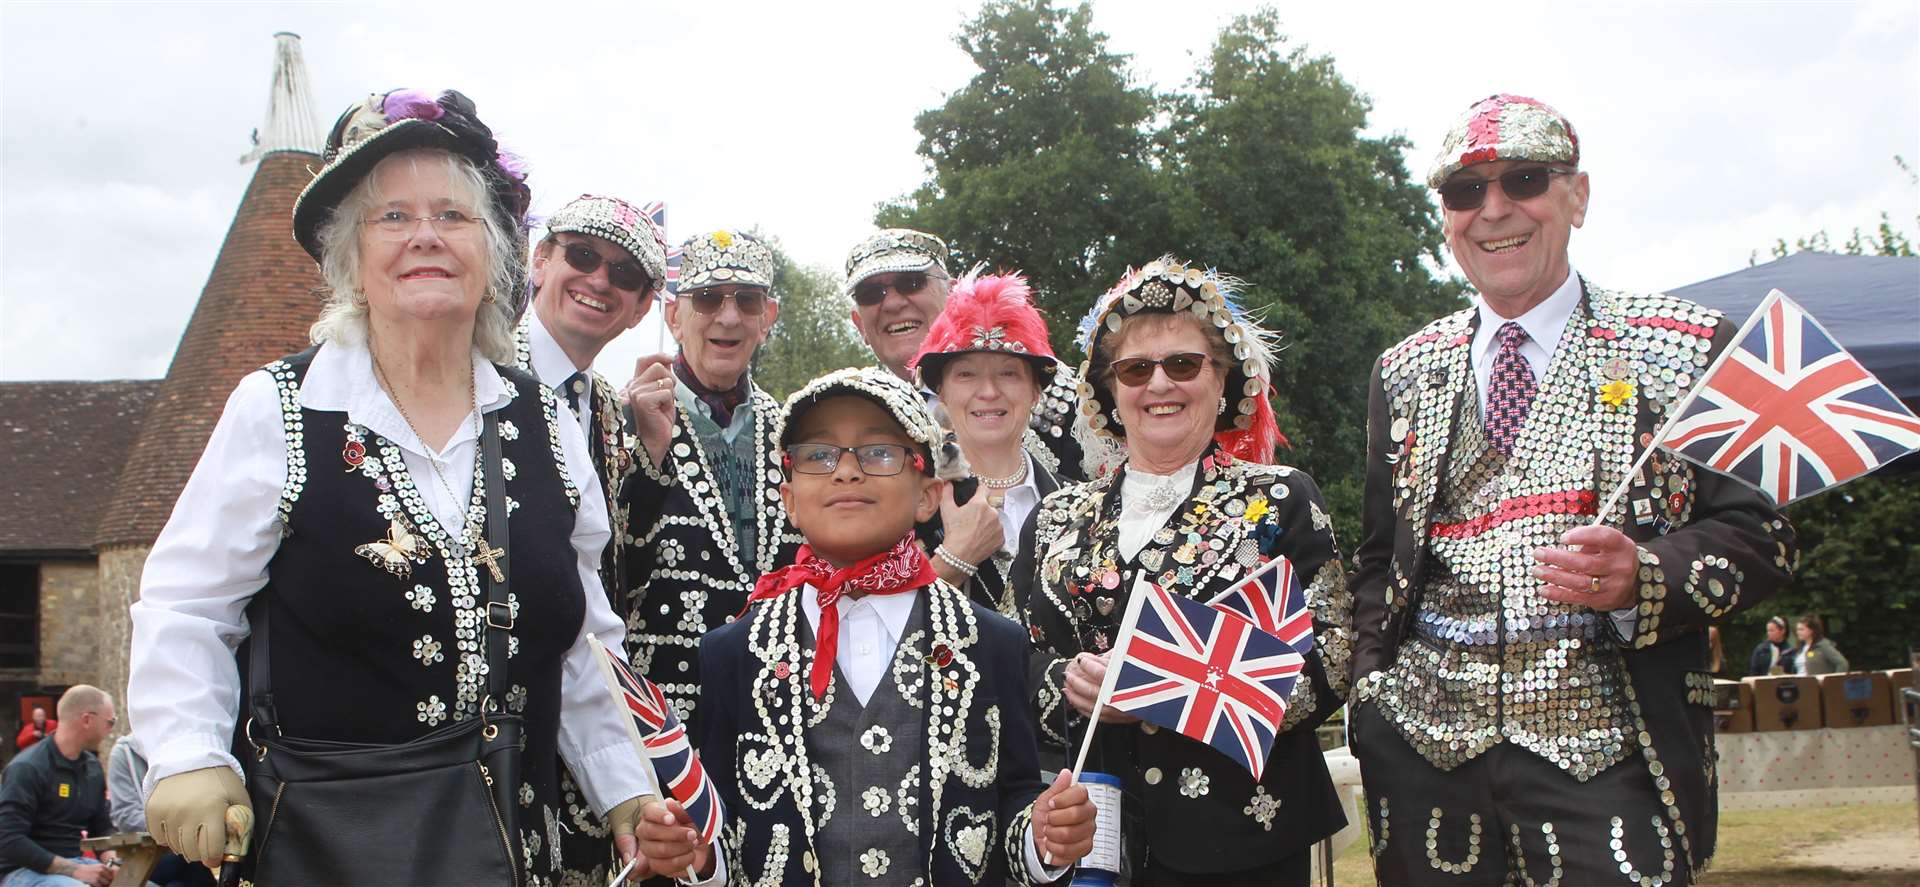 Pearly Kings and Queens at last year's event Picture: John Westhrop